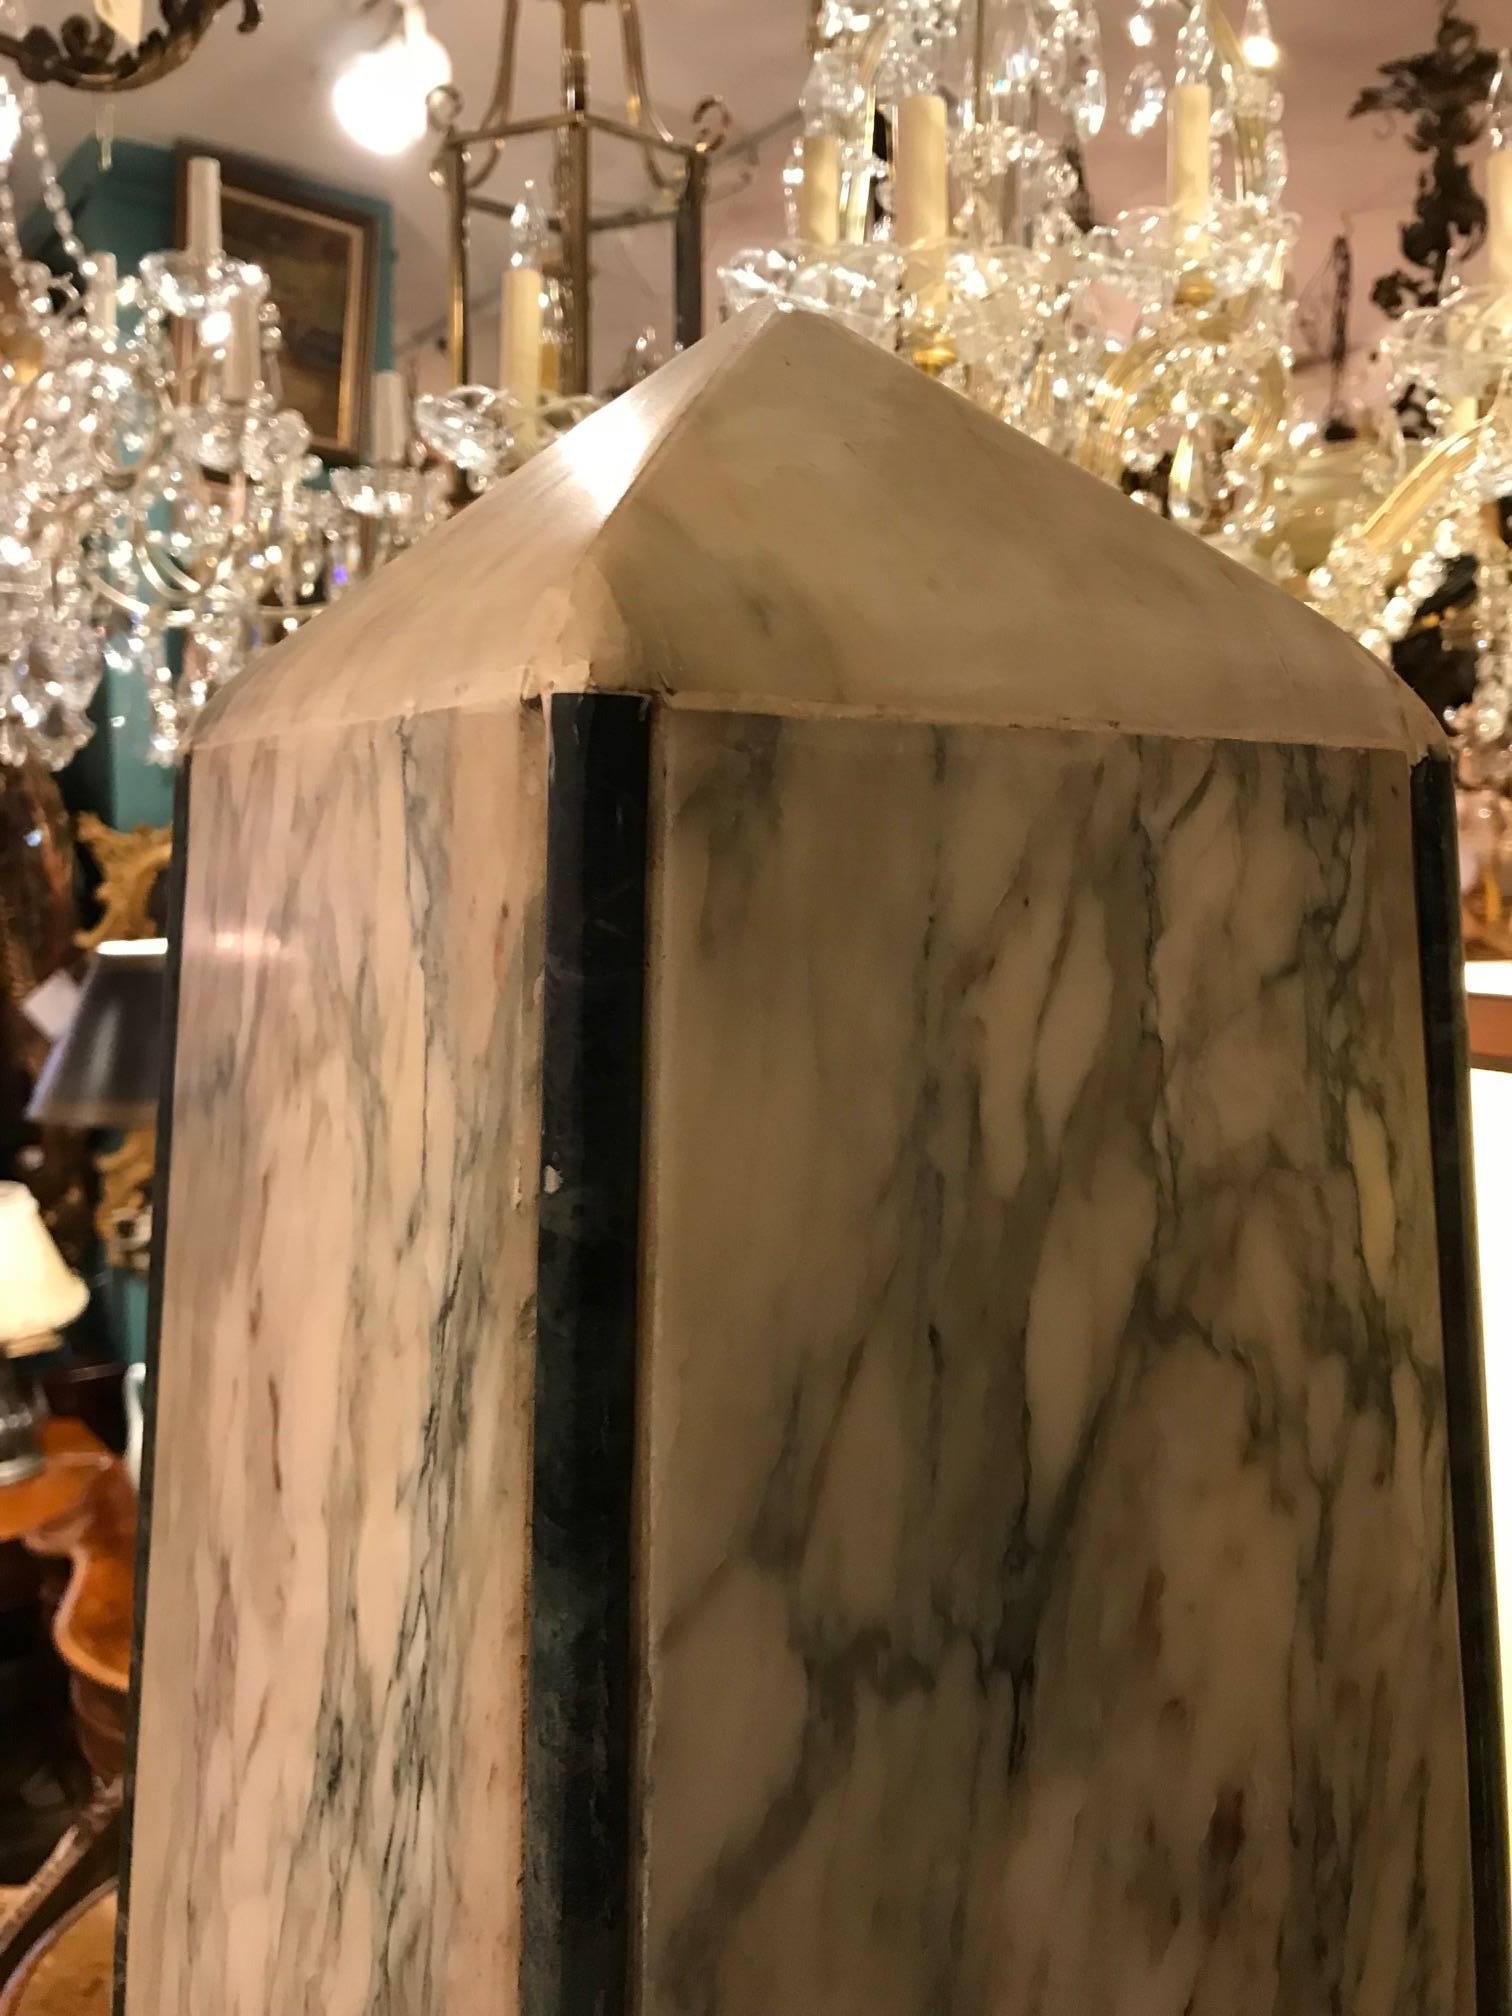 Pair of veined white marble garden obelisks with  contrasting dark green marble moldings, on square stepped plinths with lozenge shaped appliques.

Obelisks and all things Egyptian come into fashion after Napoleon's unfortunate campaign in Egypt.